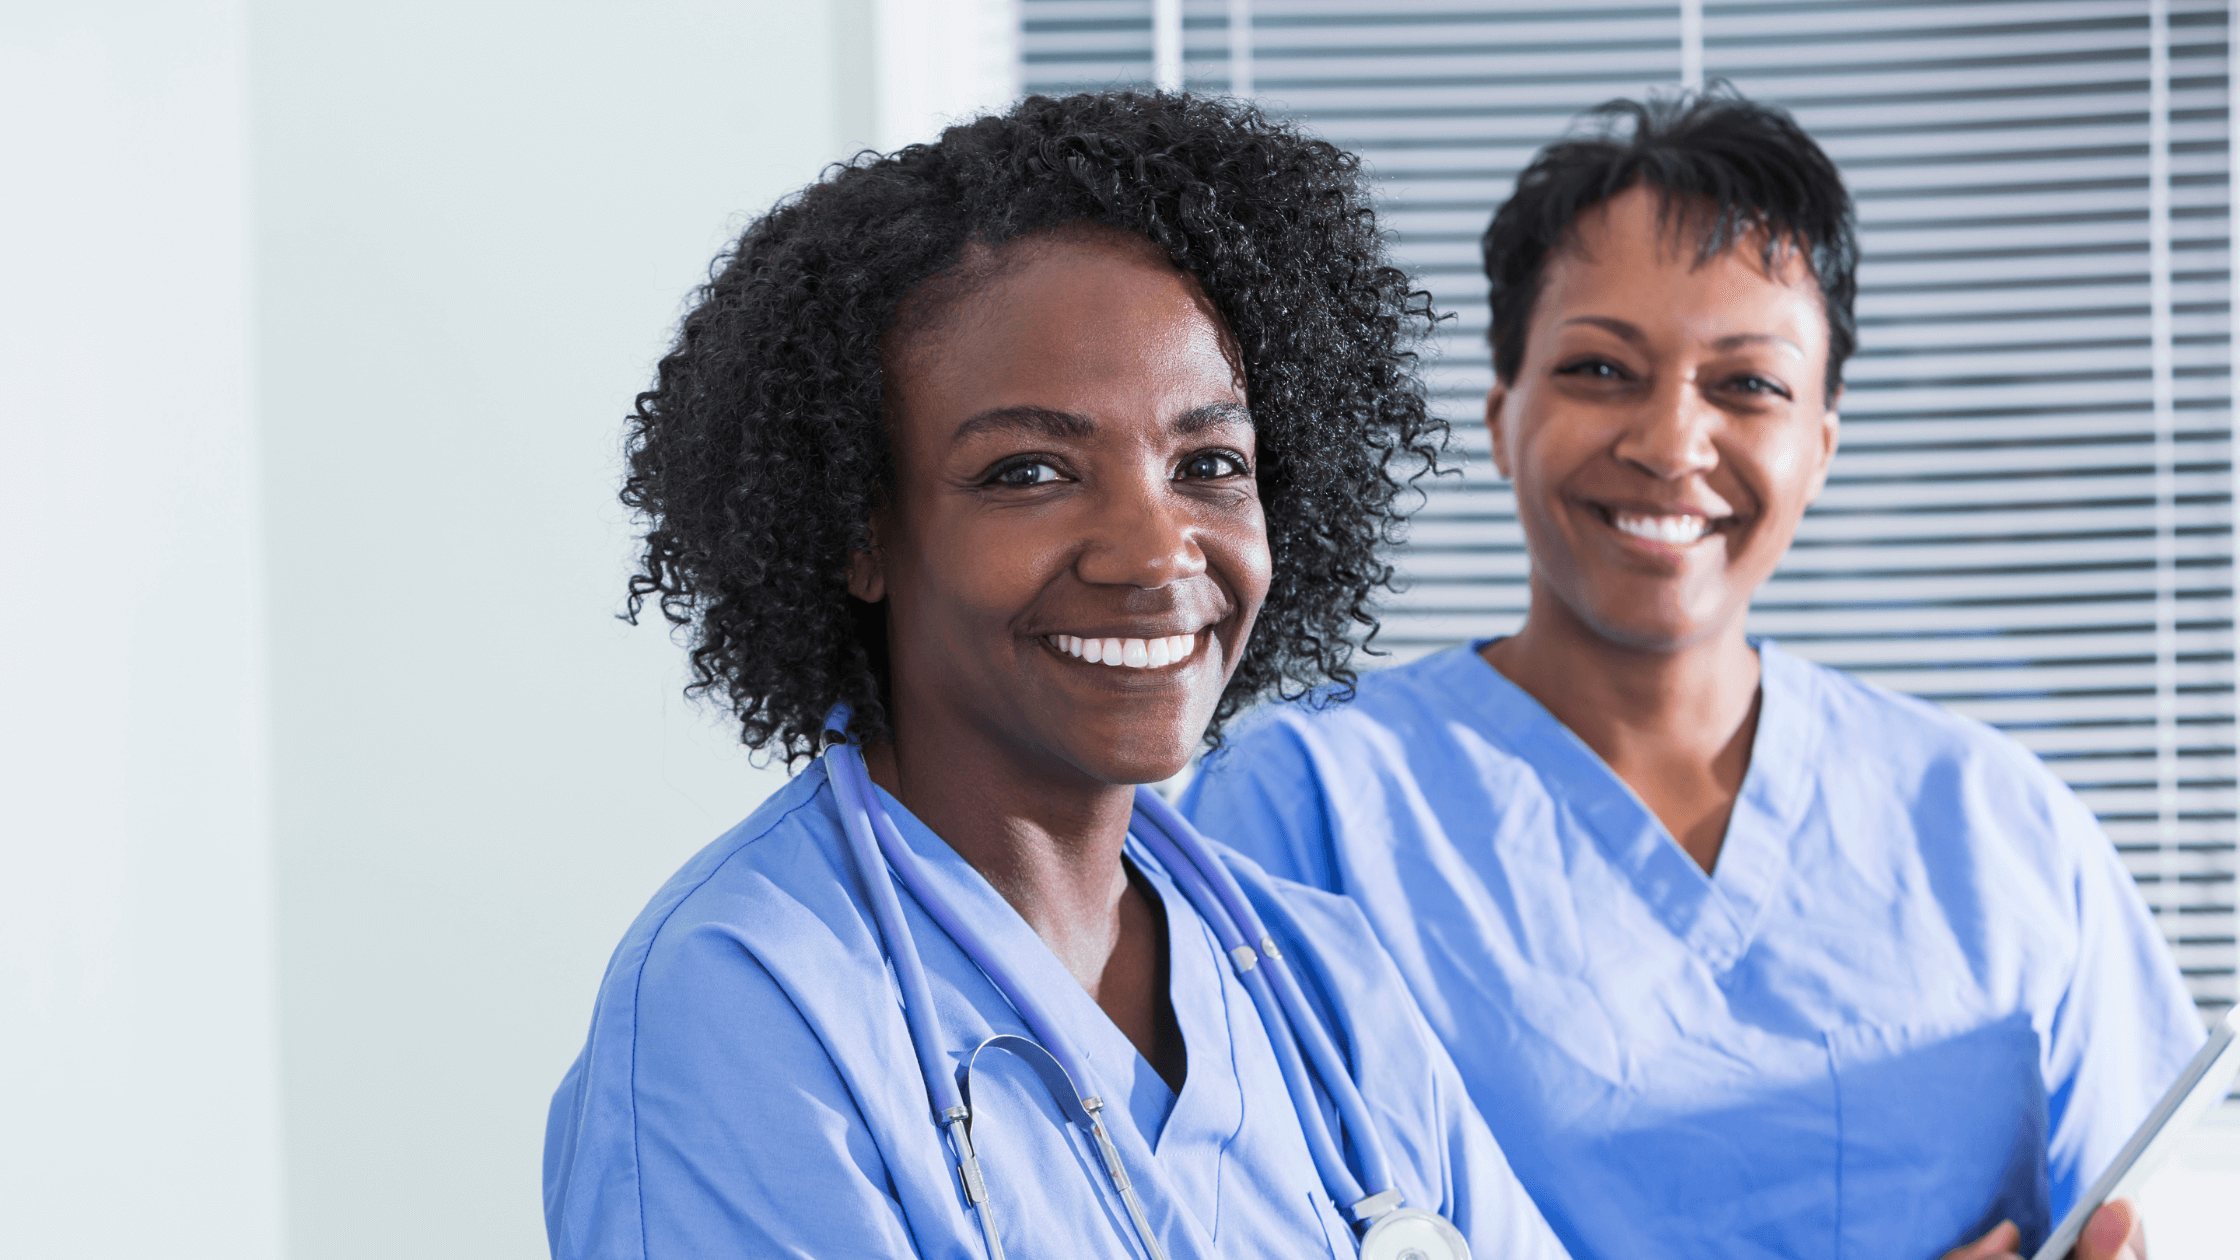 Two woman of color caregiver with natural hair wearing uniform smiling